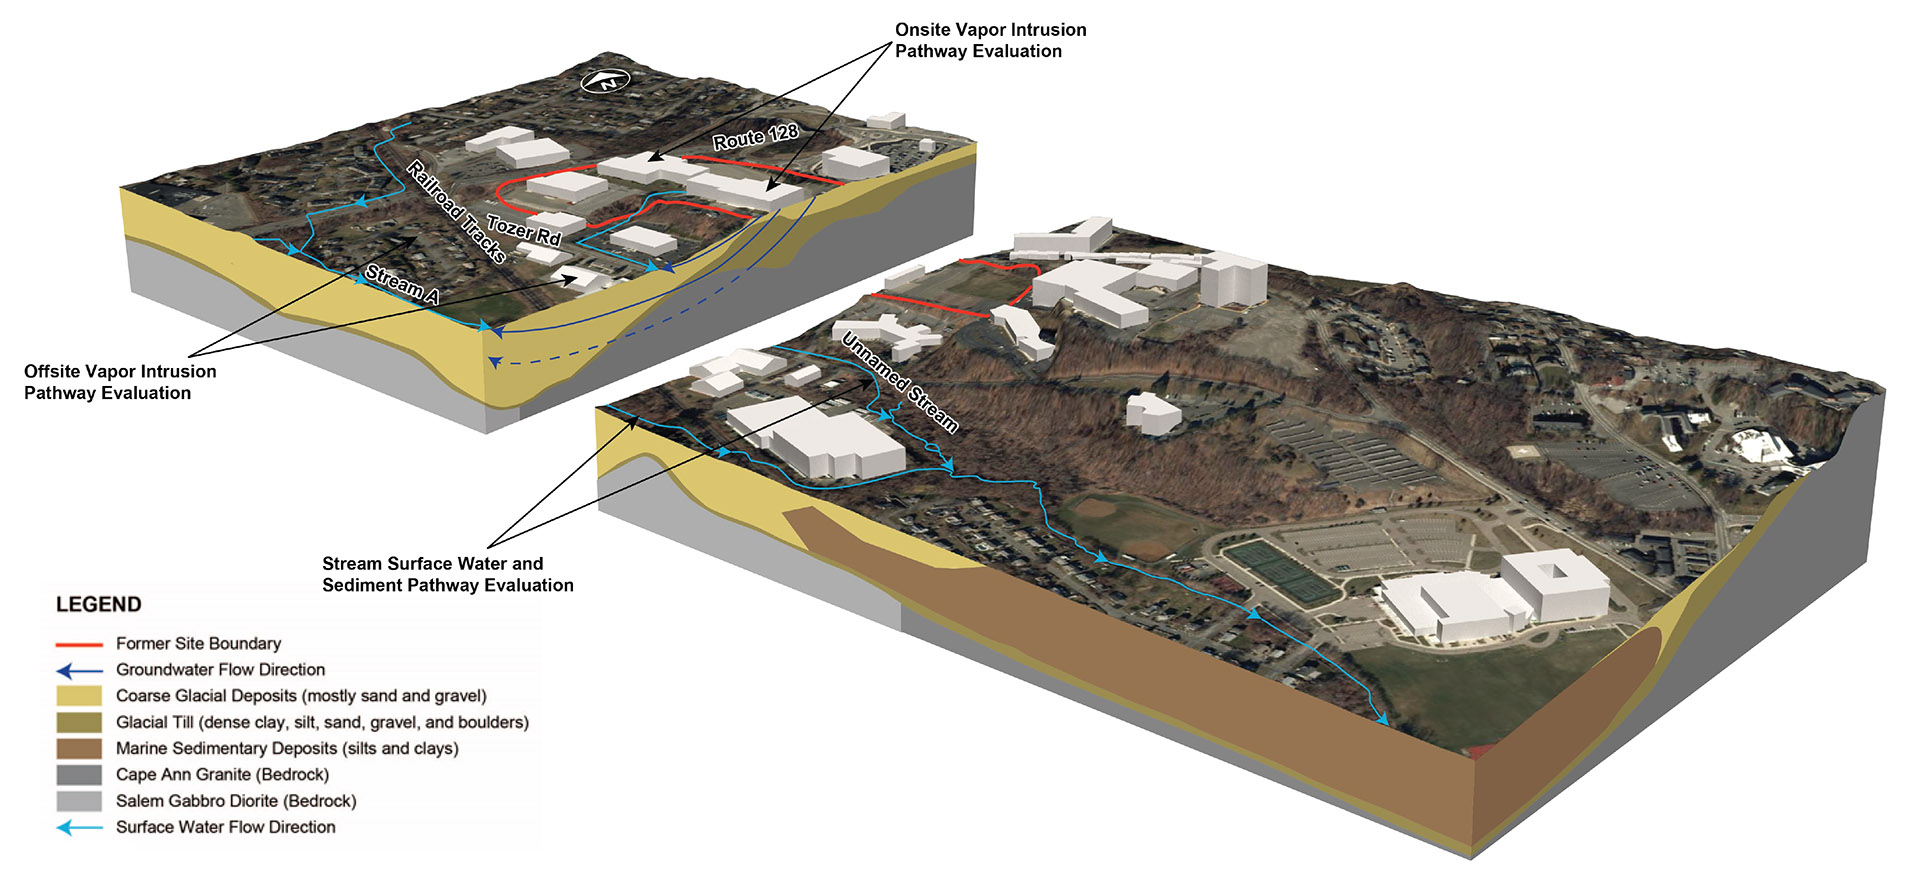 3D Visualization of former Varian site showing potential contaminant pathways.